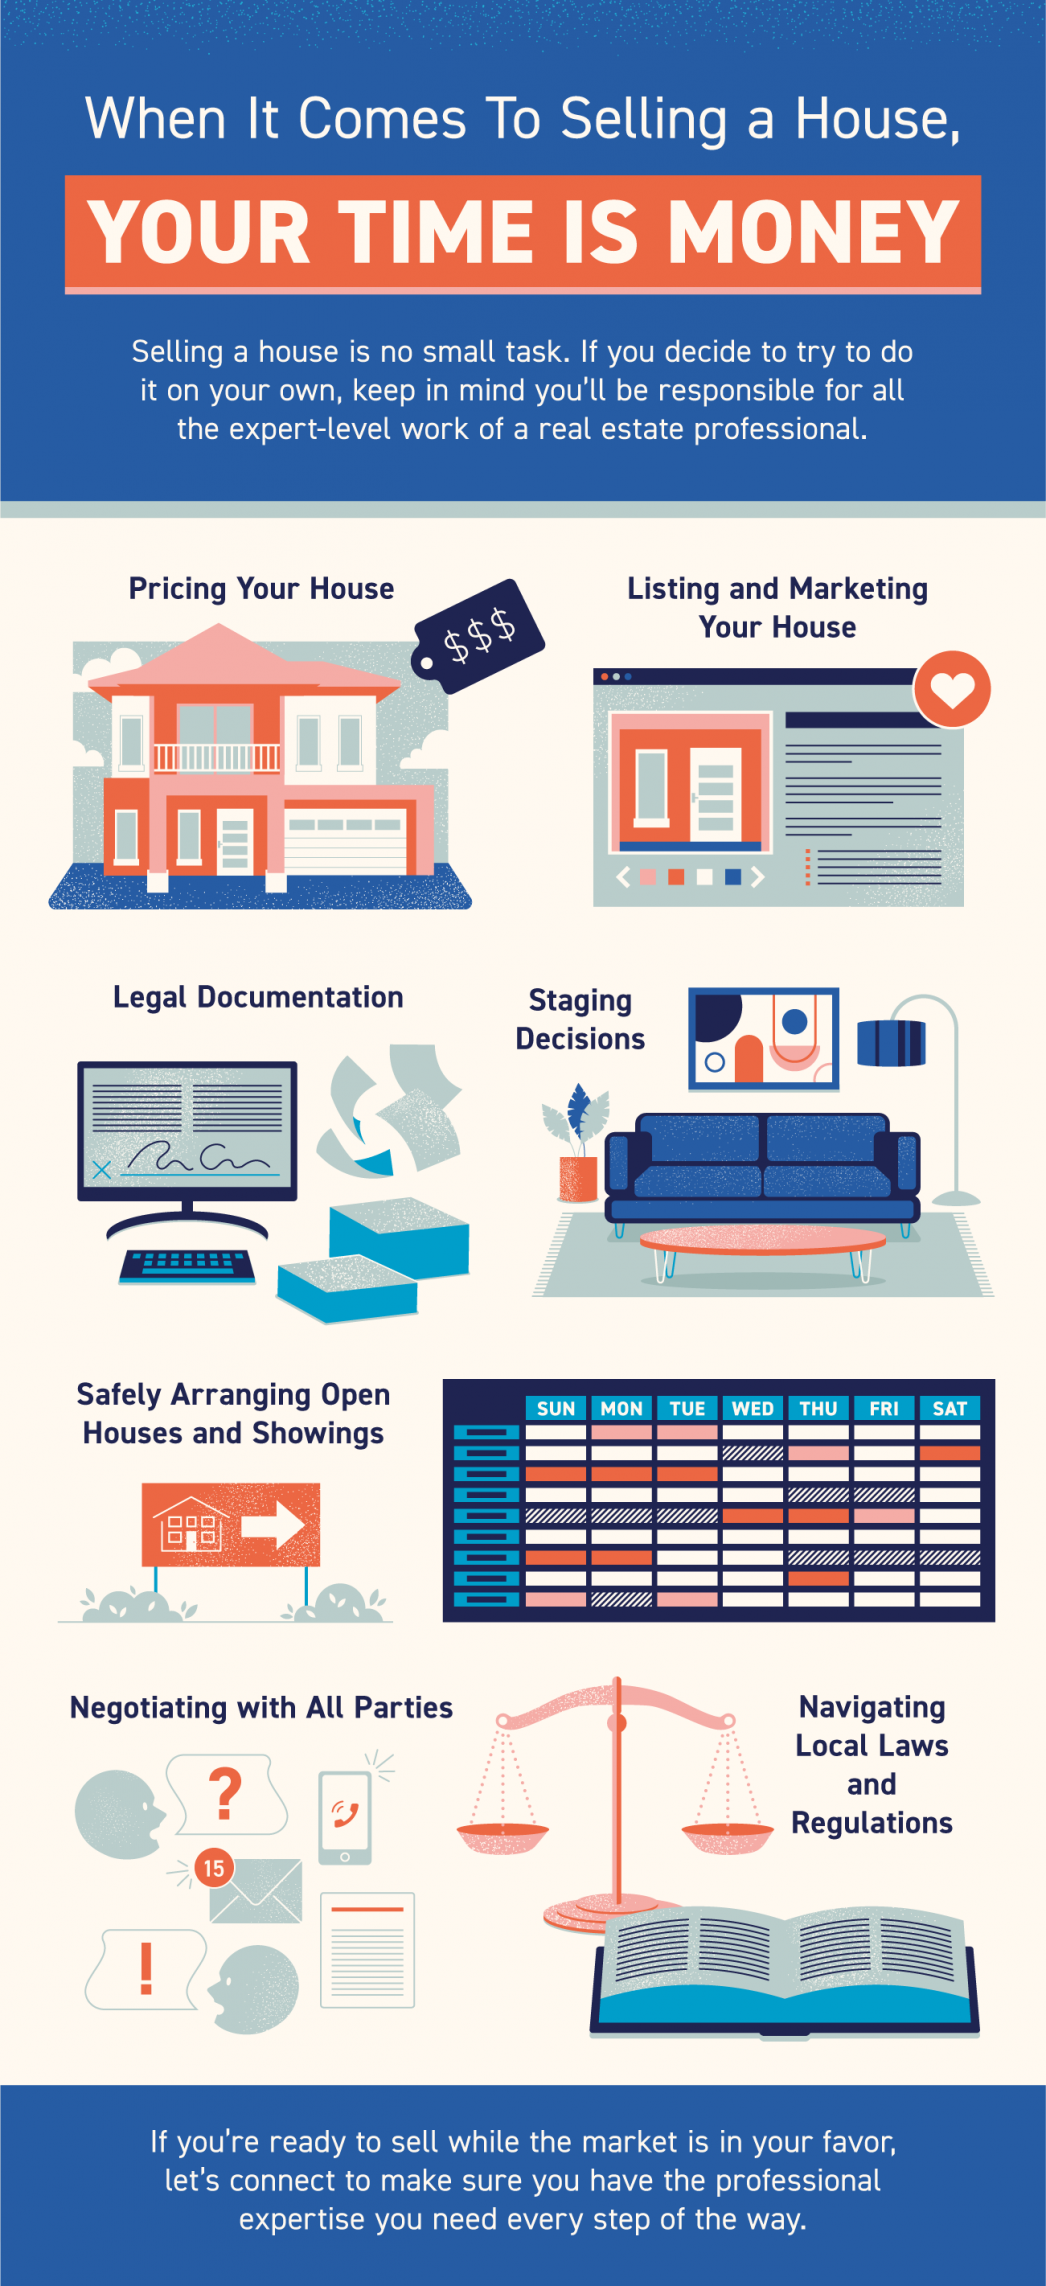 When It Comes To Selling a House, Your Time Is Money [INFOGRAPHIC] | MyKCM